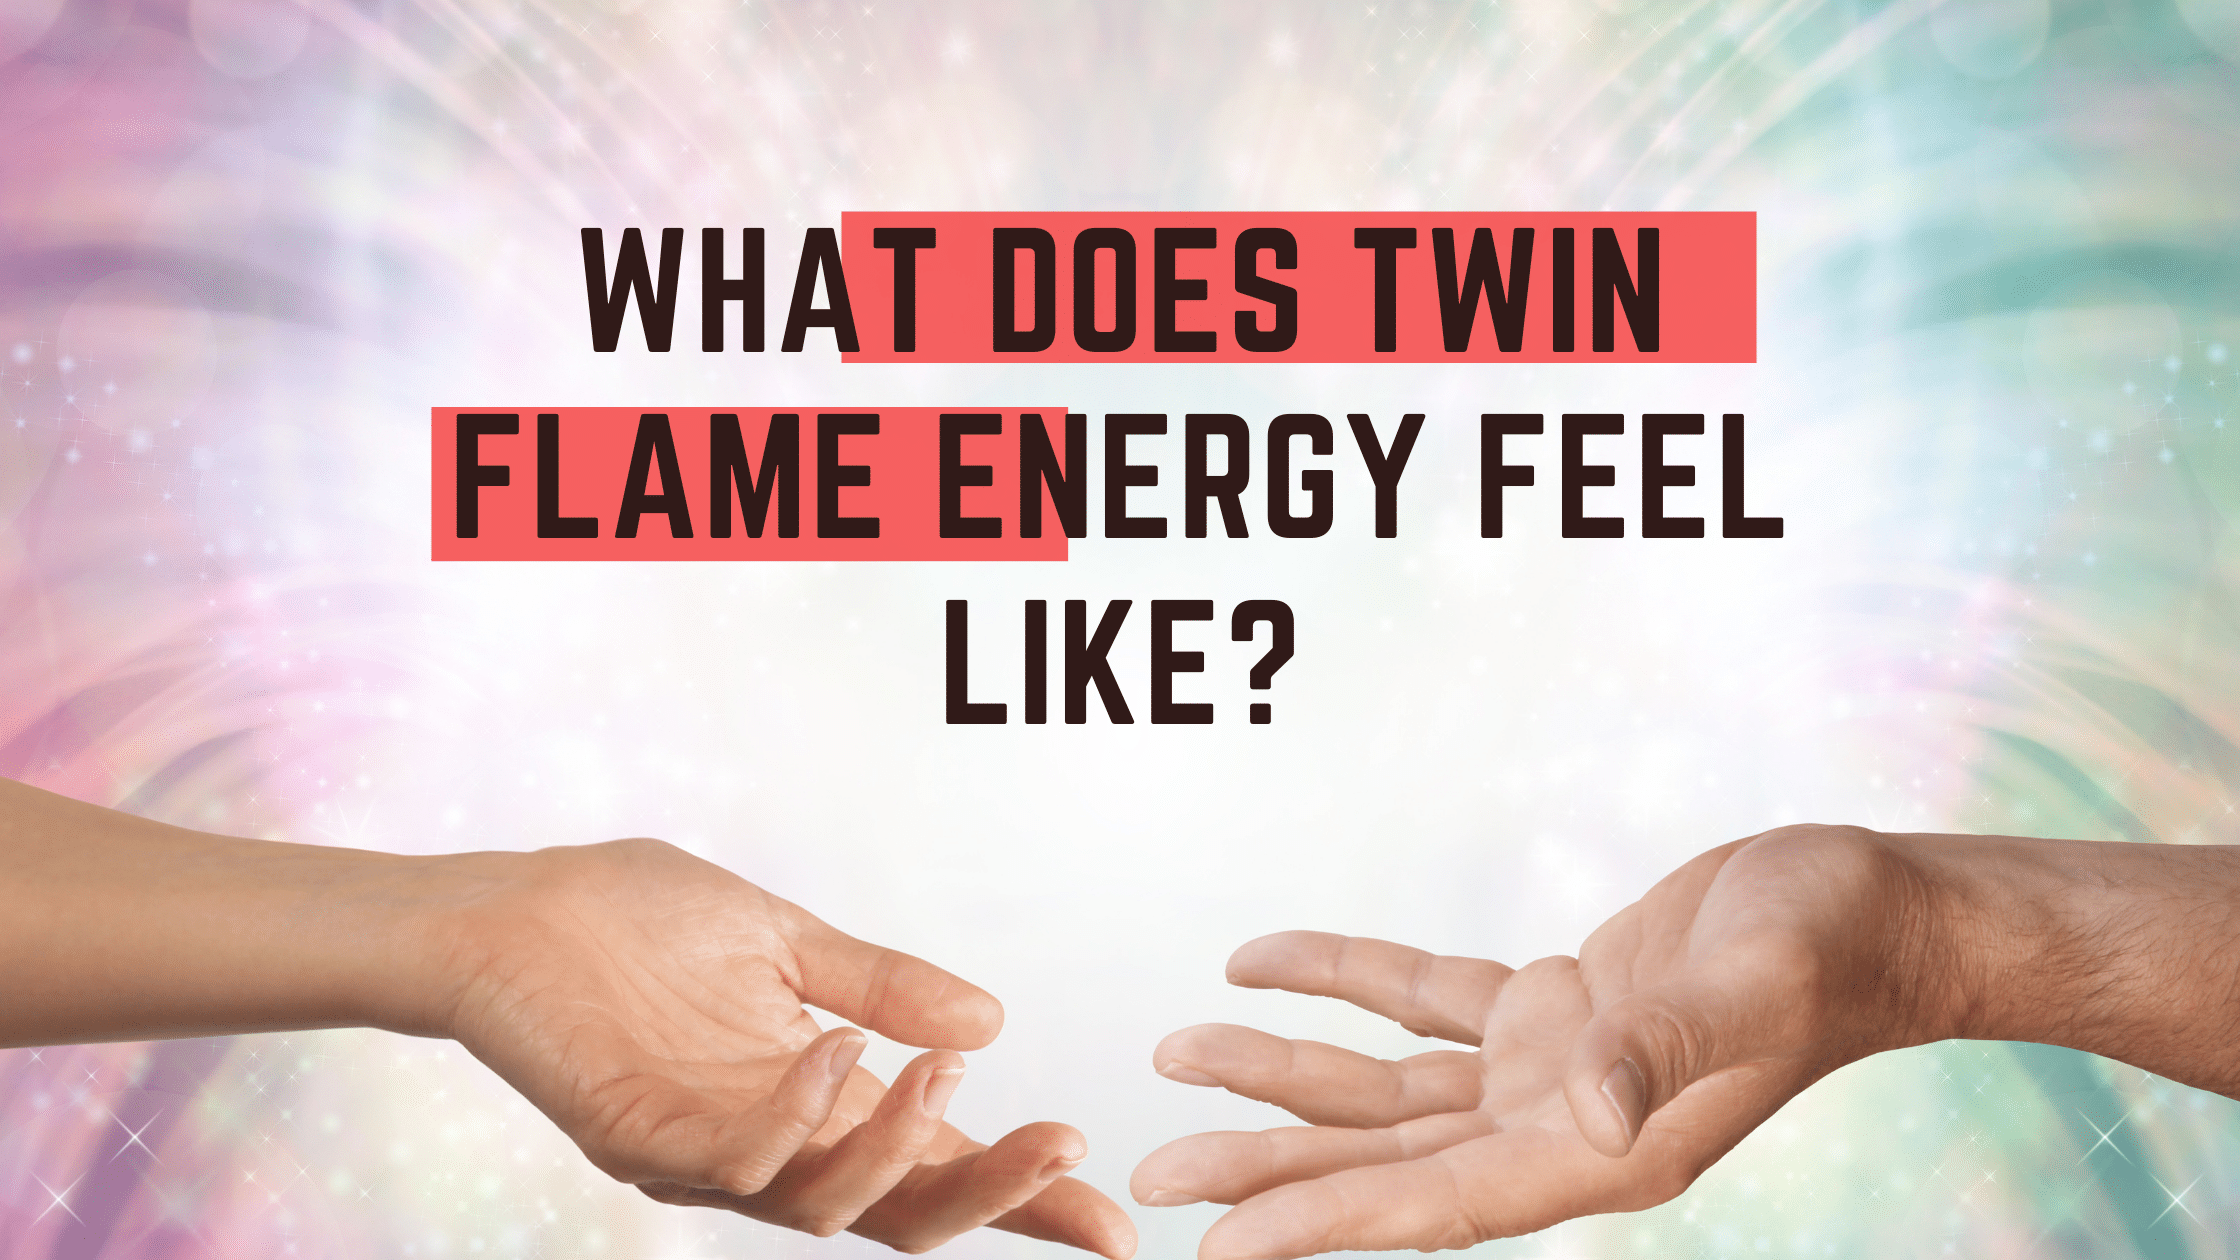 What Does Twin Flame Energy Feel Like?